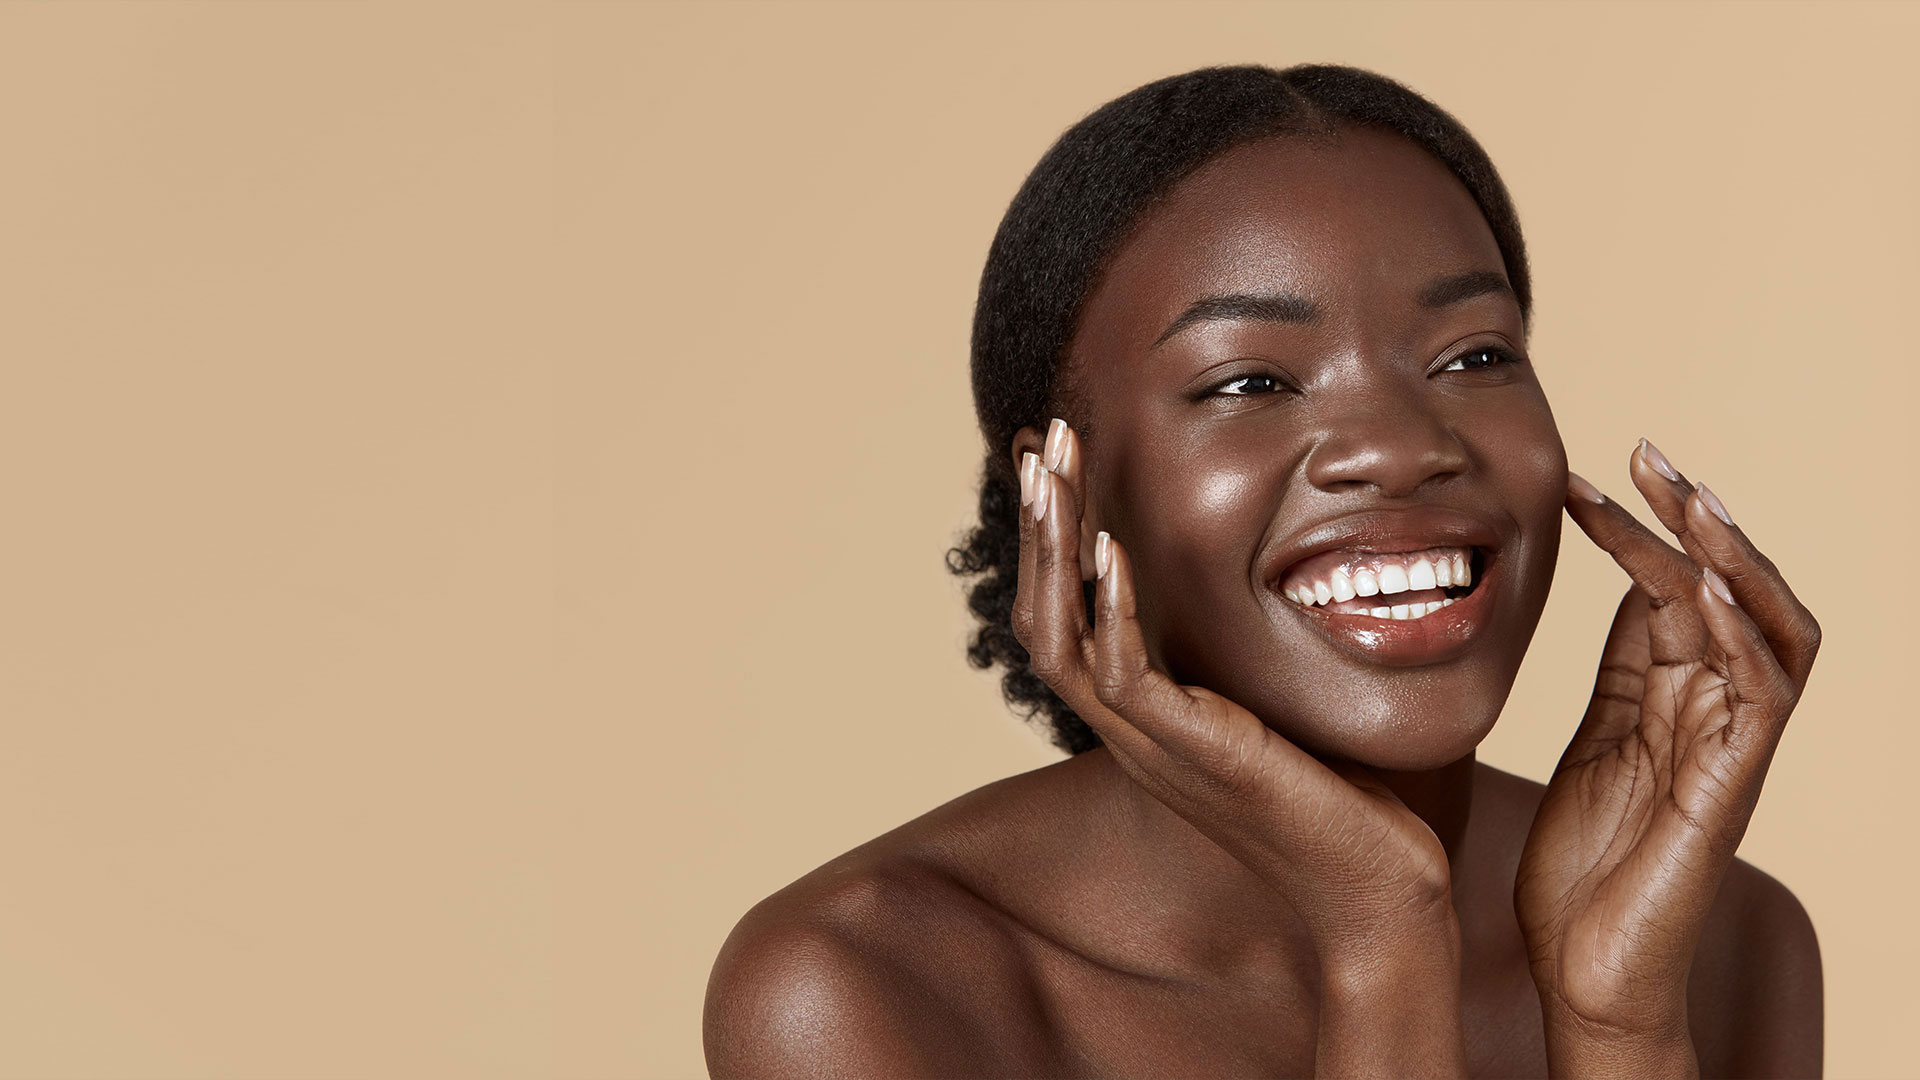 Beautiful black woman touching cheek and smiling due to microdermabrasion treatment